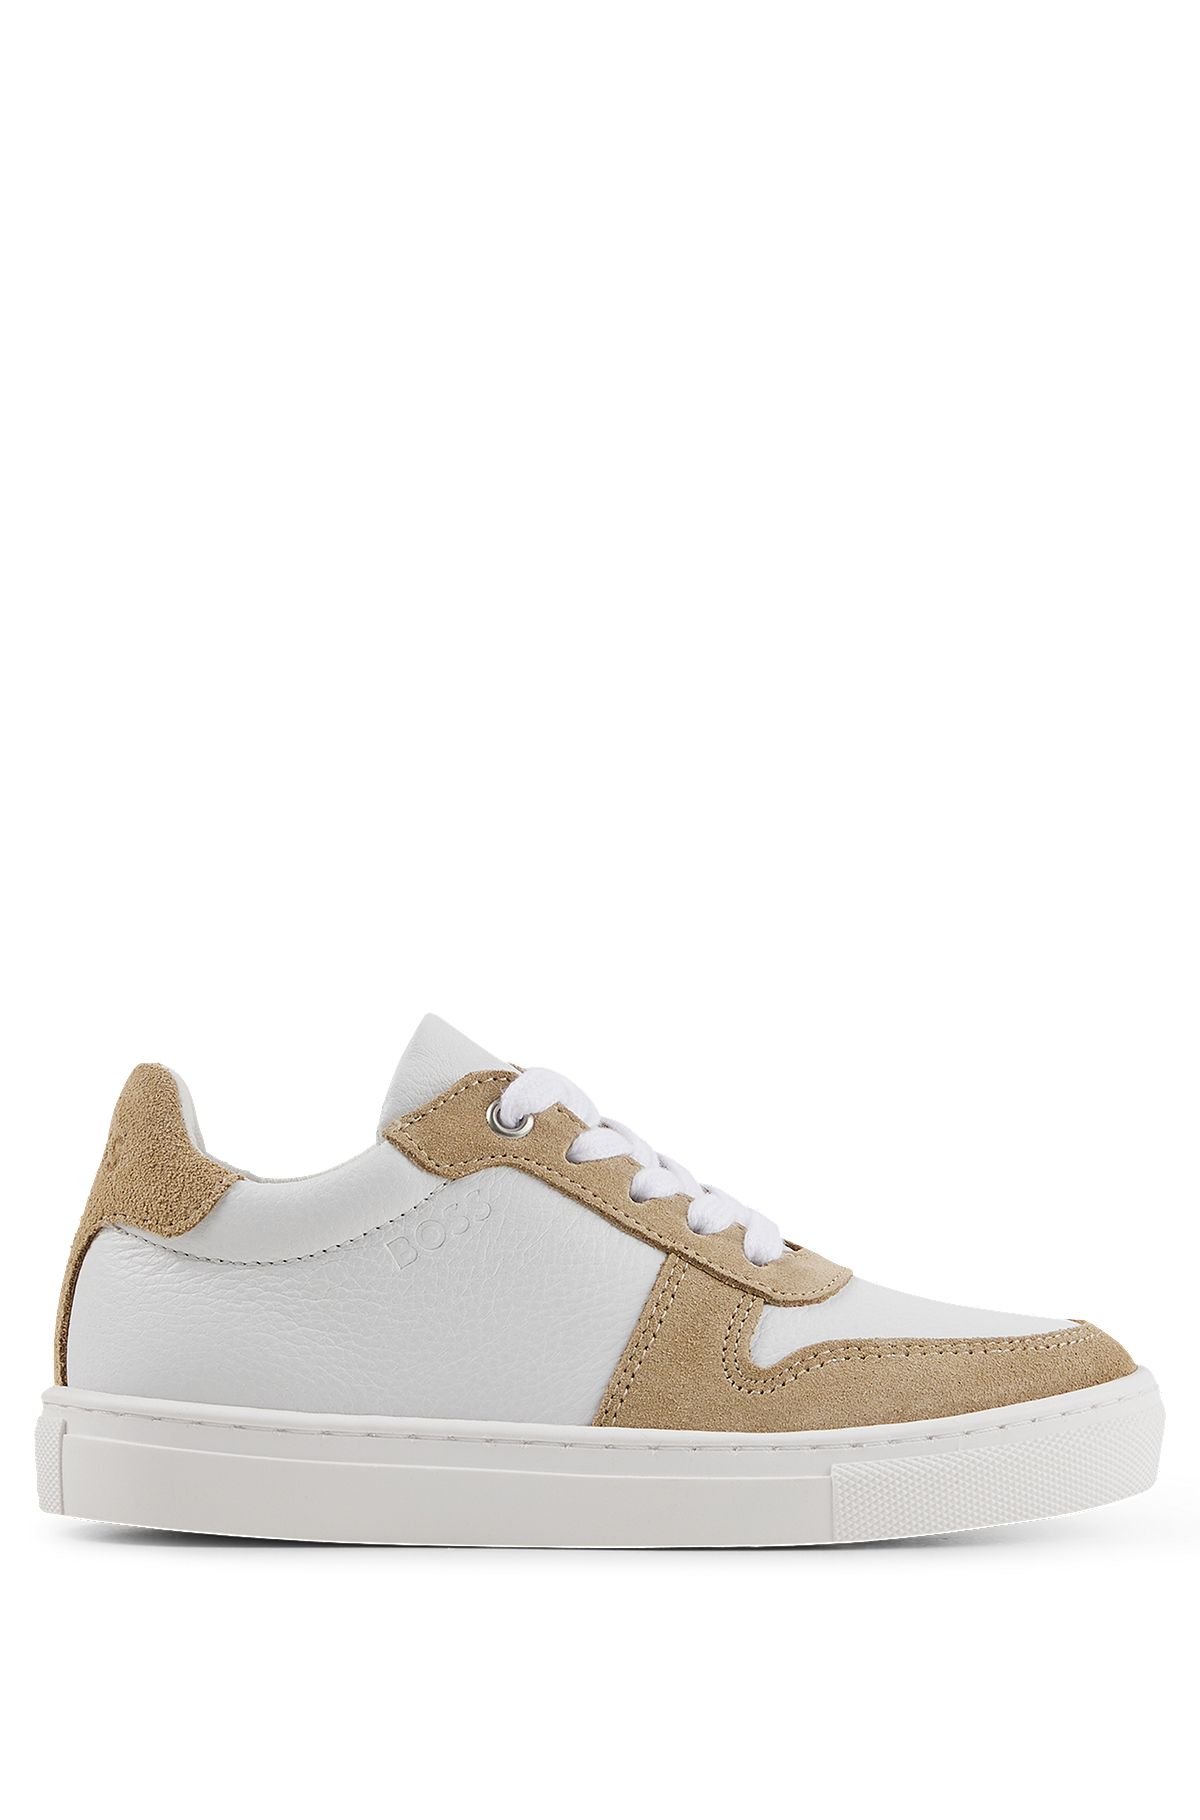 Kids' low-top trainers in leather and suede, White